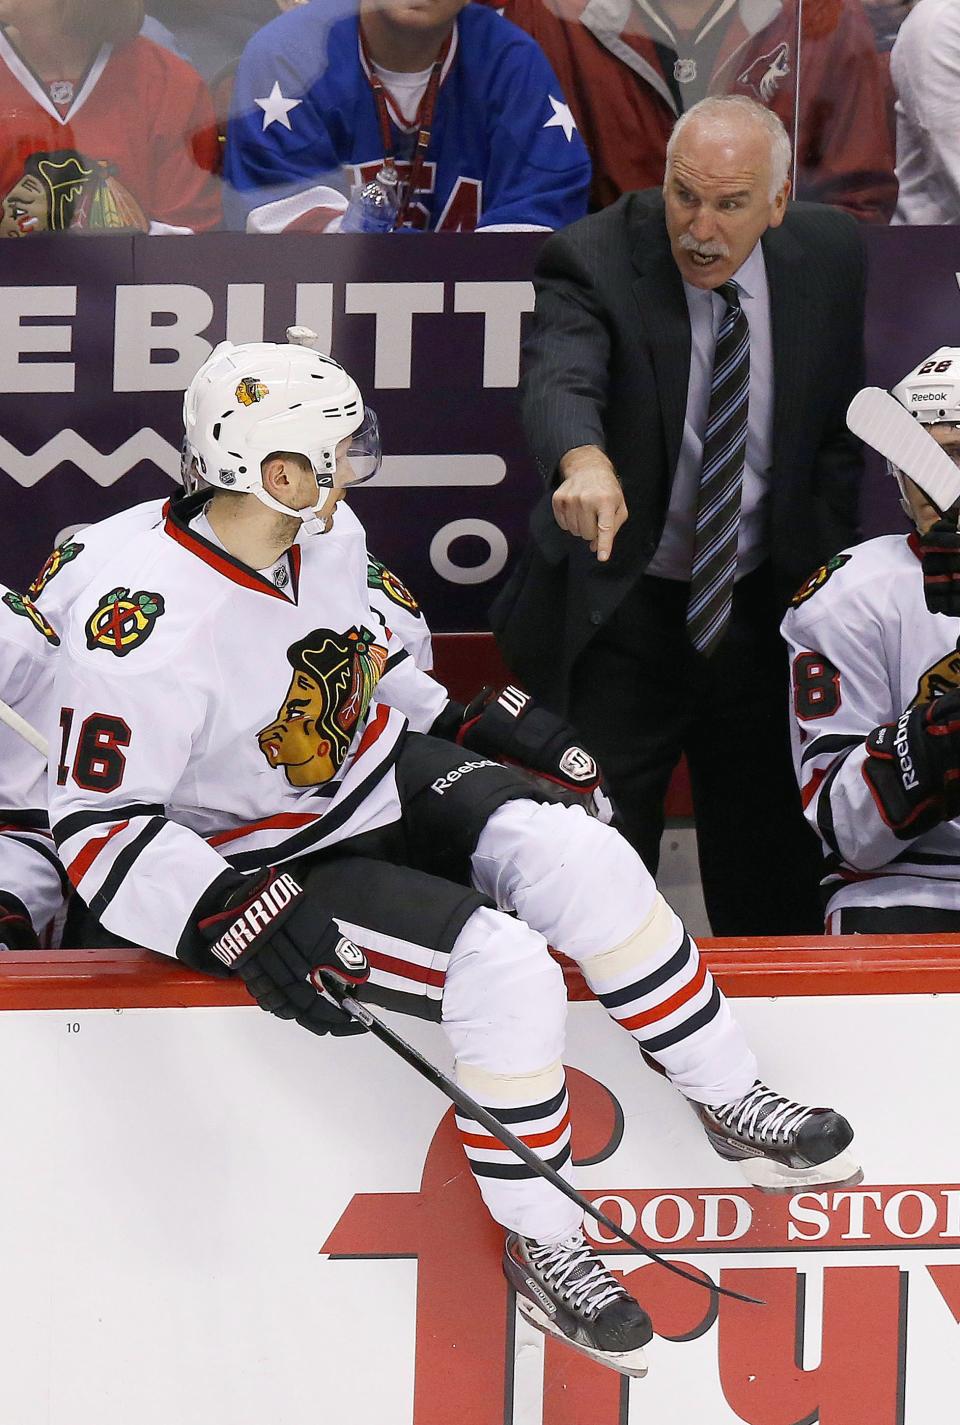 Chicago Blackhawks' Joel Quenneville shouts instructions to his players, including Marcus Kruger (16), of Sweden, during the second period in an NHL hockey game against the Phoenix Coyotes, Friday Feb. 7, 2014, in Glendale, Ariz. (AP Photo/Ross D. Franklin)